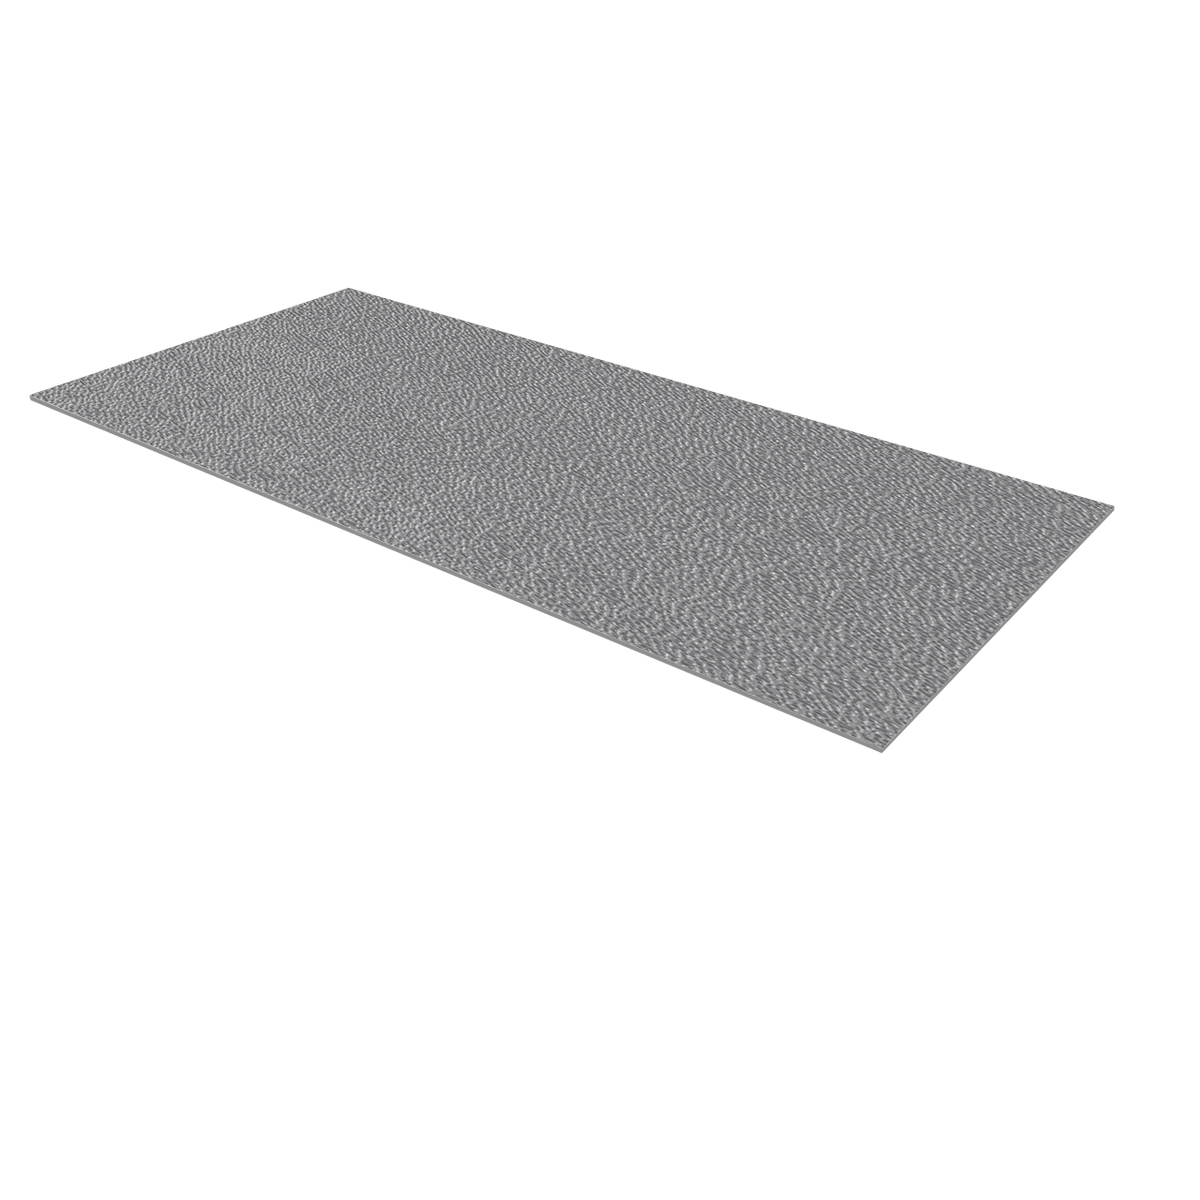 ABS Plastic Sheet - Silver